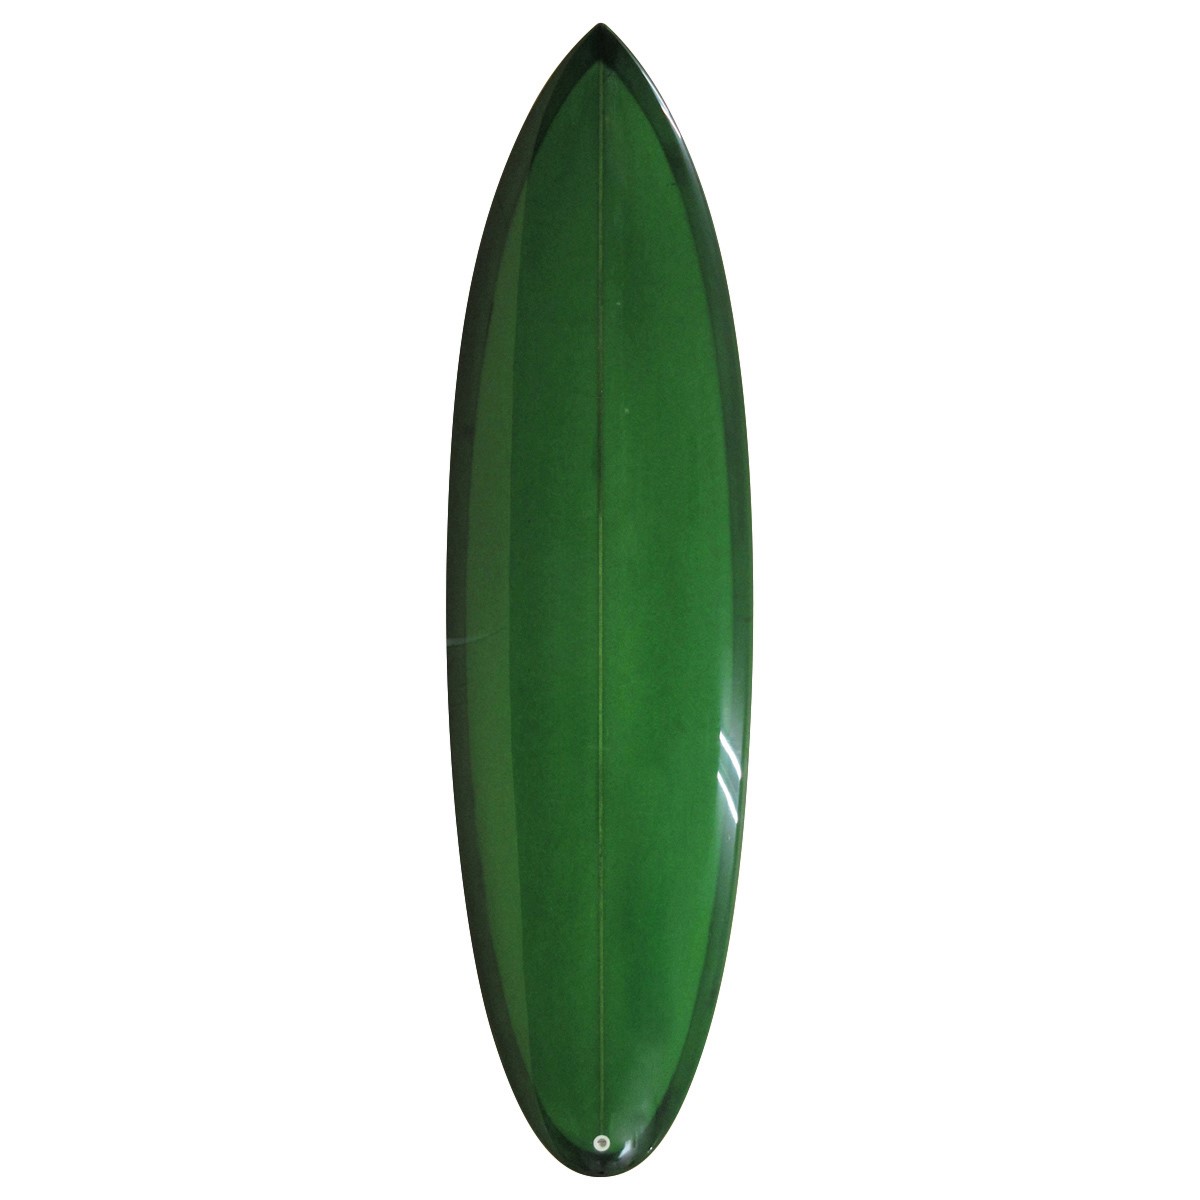  / Nodecal / Round Tail Tri 6`4 Moss Green